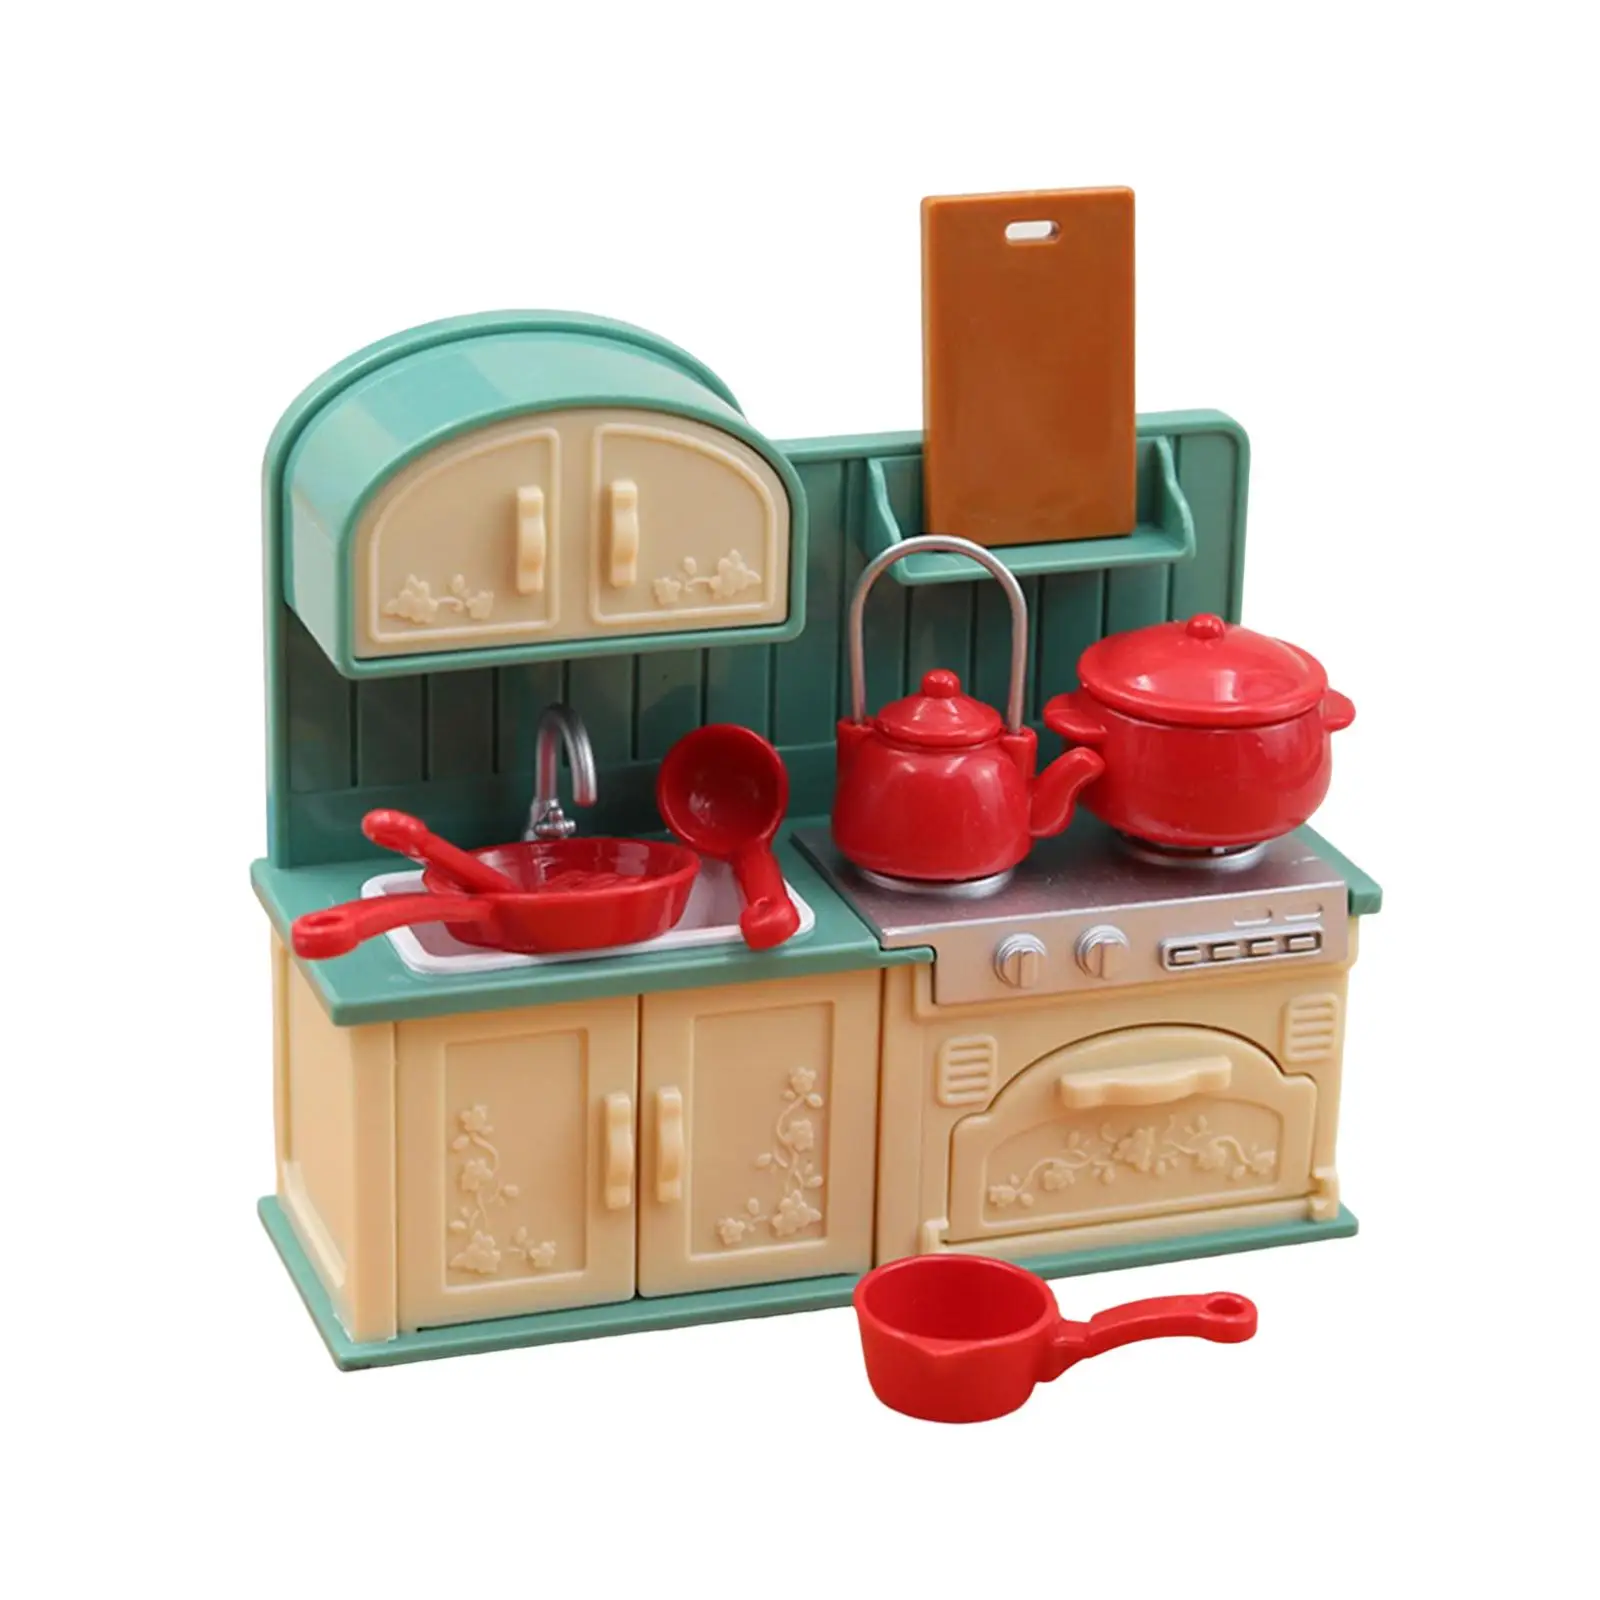 1/18 Dollhouse Play Set & Accessories Kitchen Toys with Food Pots for Mini Dolls Doll House Furniture Toys for Girls Presents